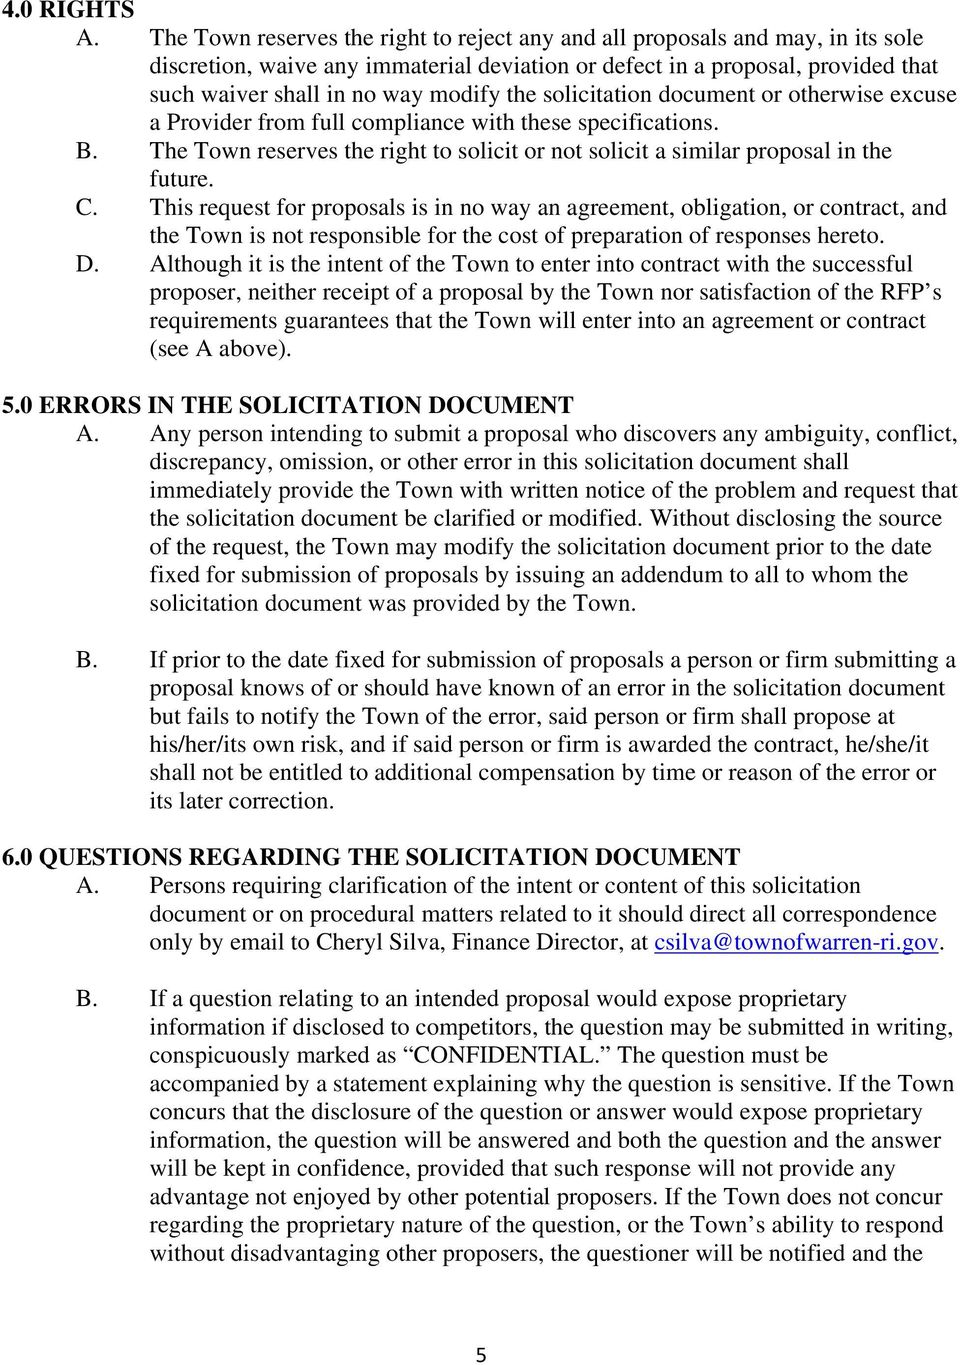 the solicitation document or otherwise excuse a Provider from full compliance with these specifications. B. The Town reserves the right to solicit or not solicit a similar proposal in the future. C.